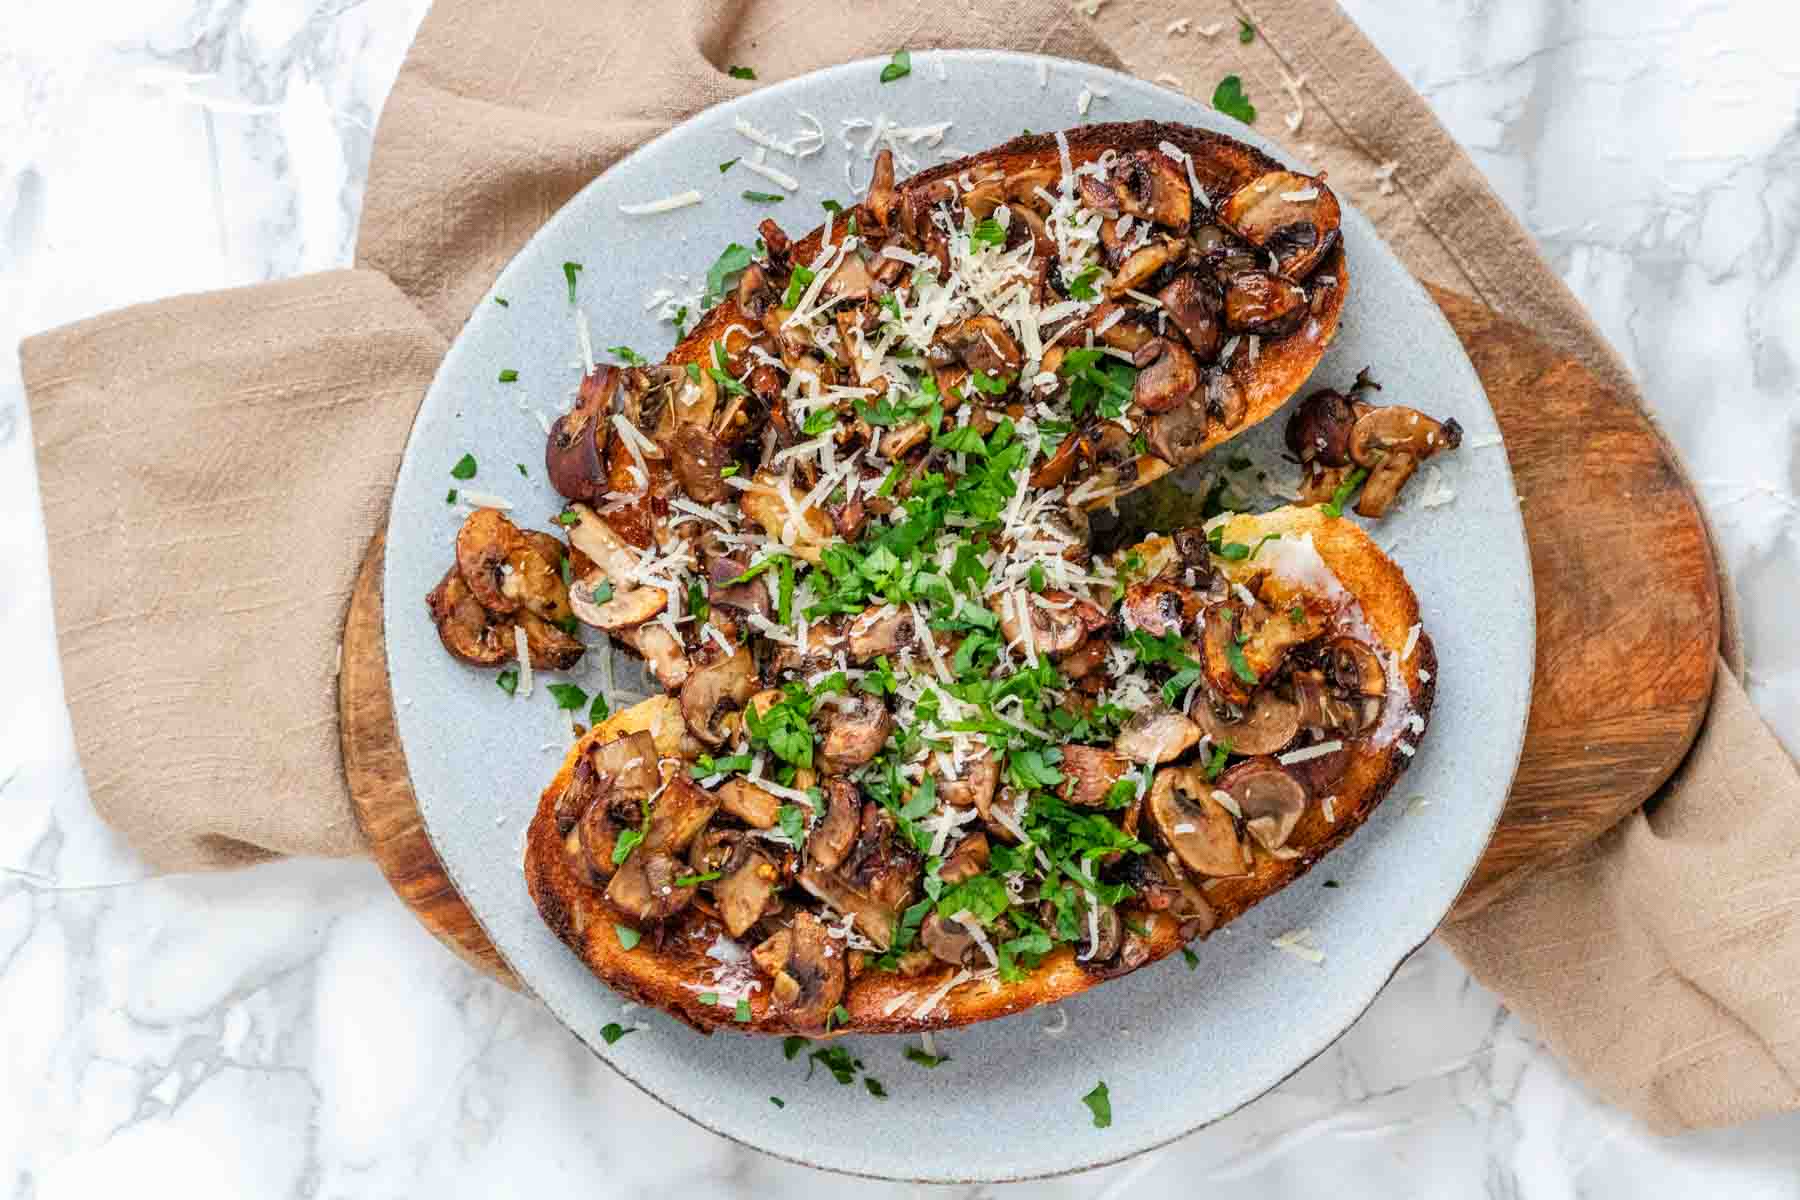 Toast on a plate topped with mushrooms, cheese, and parsley.